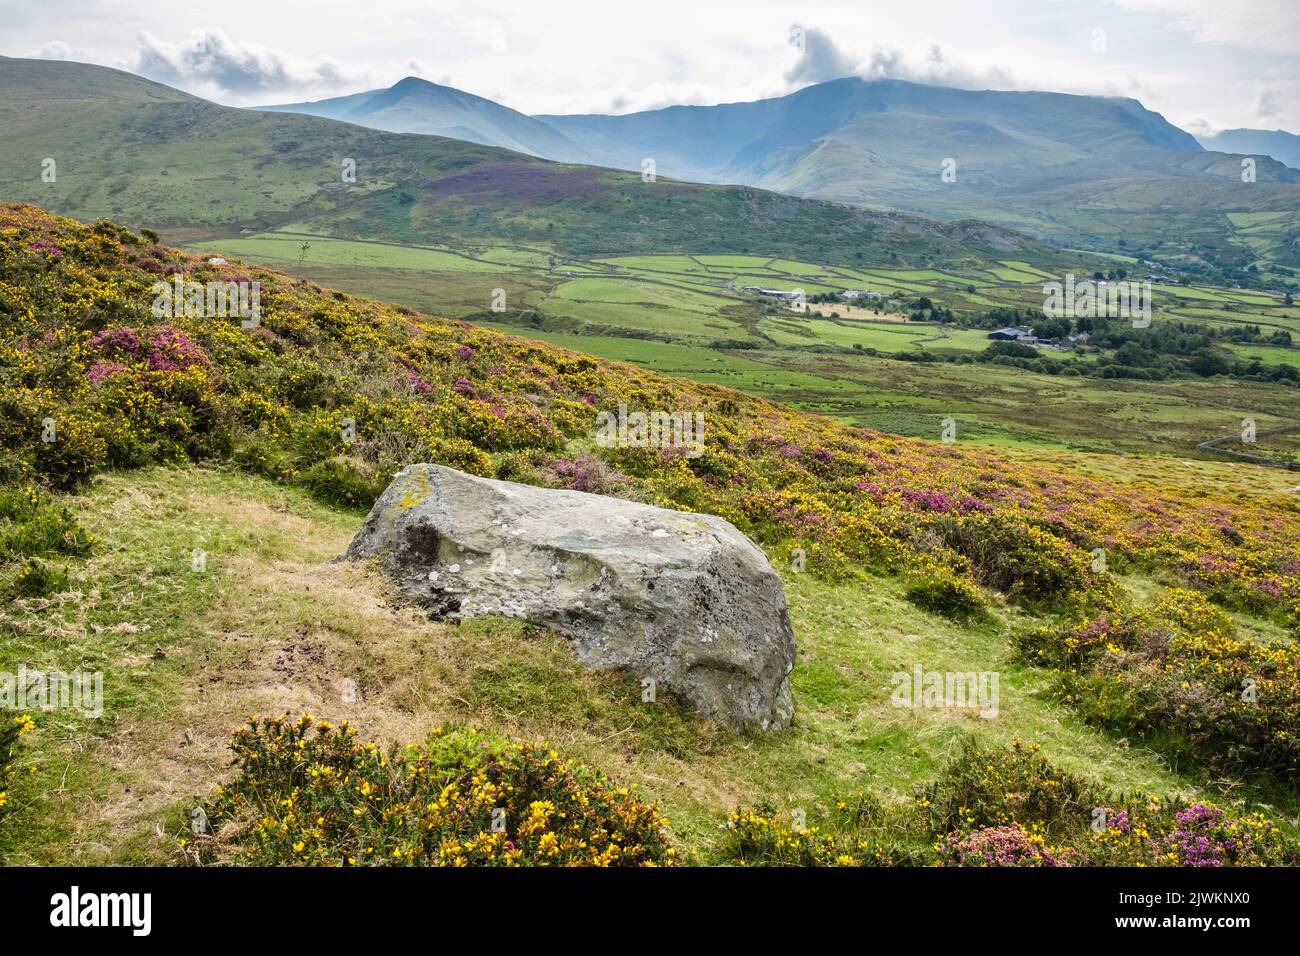 Country landscape with flowering heather and gorse on Llefn hillside in Snowdonia National Park. Bethesda, Gwynedd, north Wales, UK, Britain Stock Photo